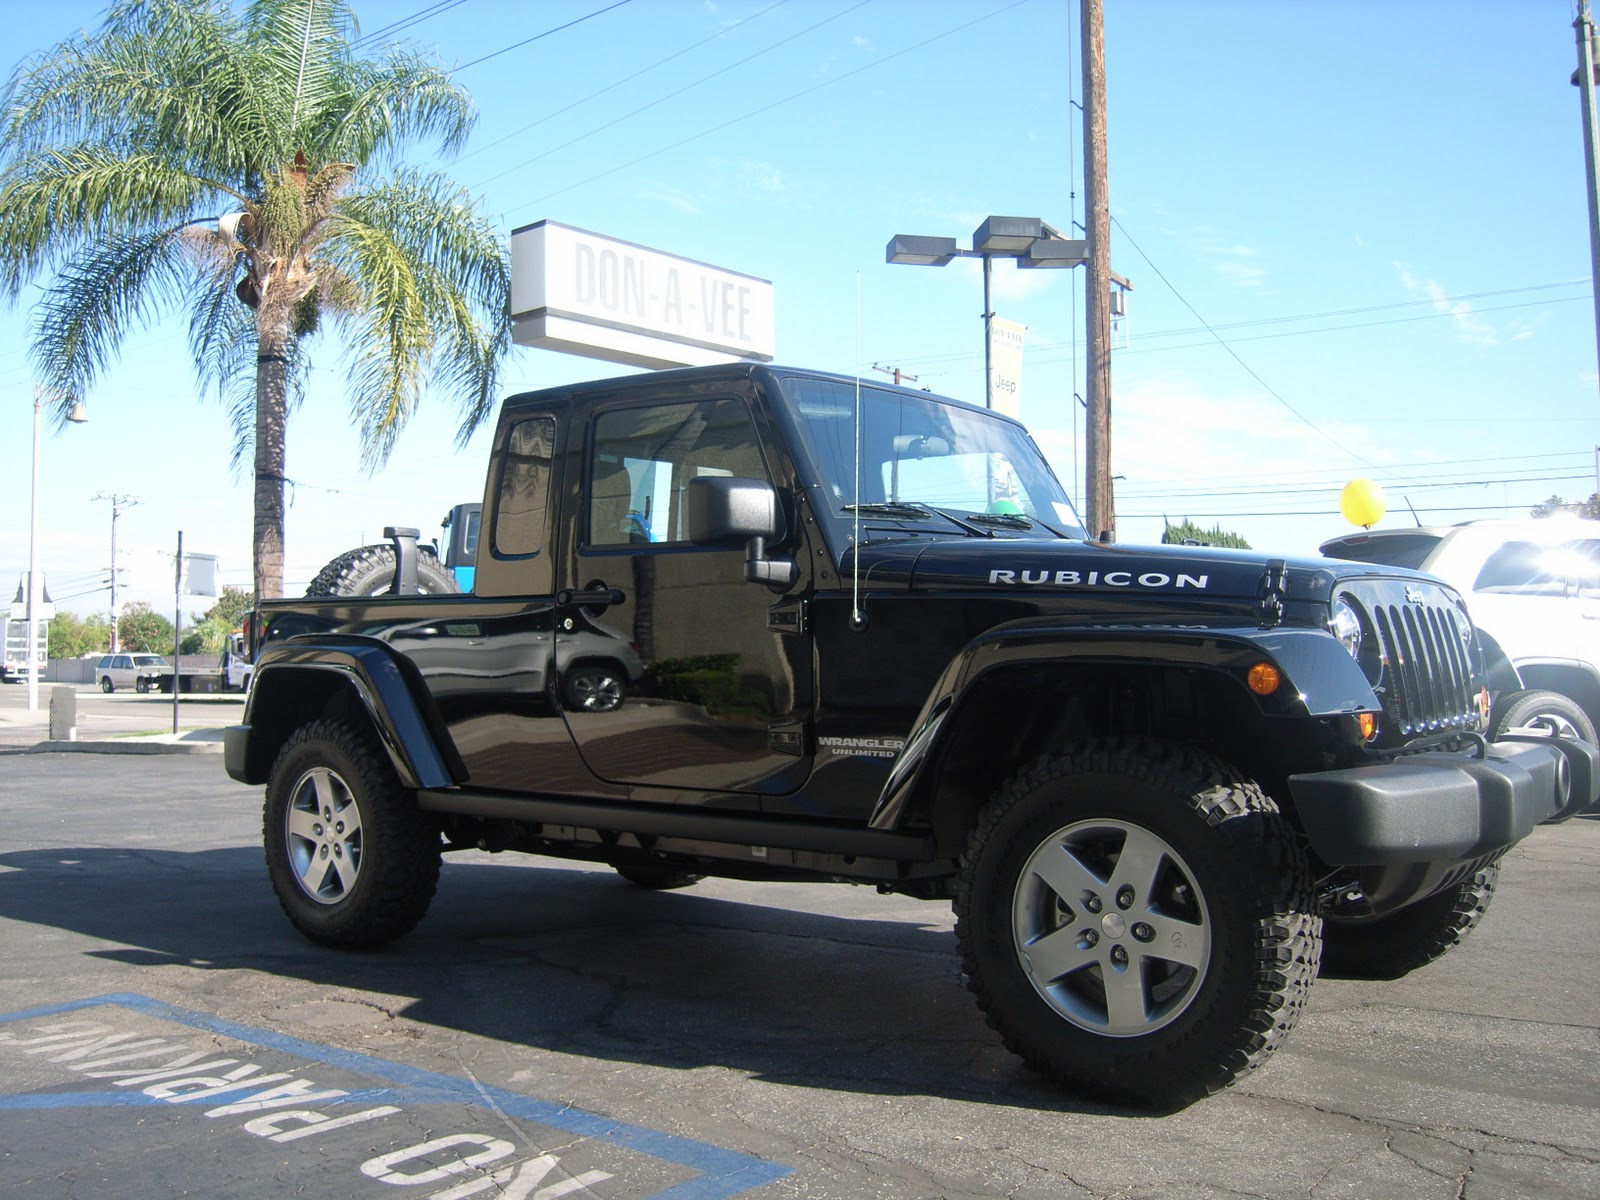 Orange County Jeep Info: The Only Jeep Wrangler JK8 Pick Up Conversion In The United States At